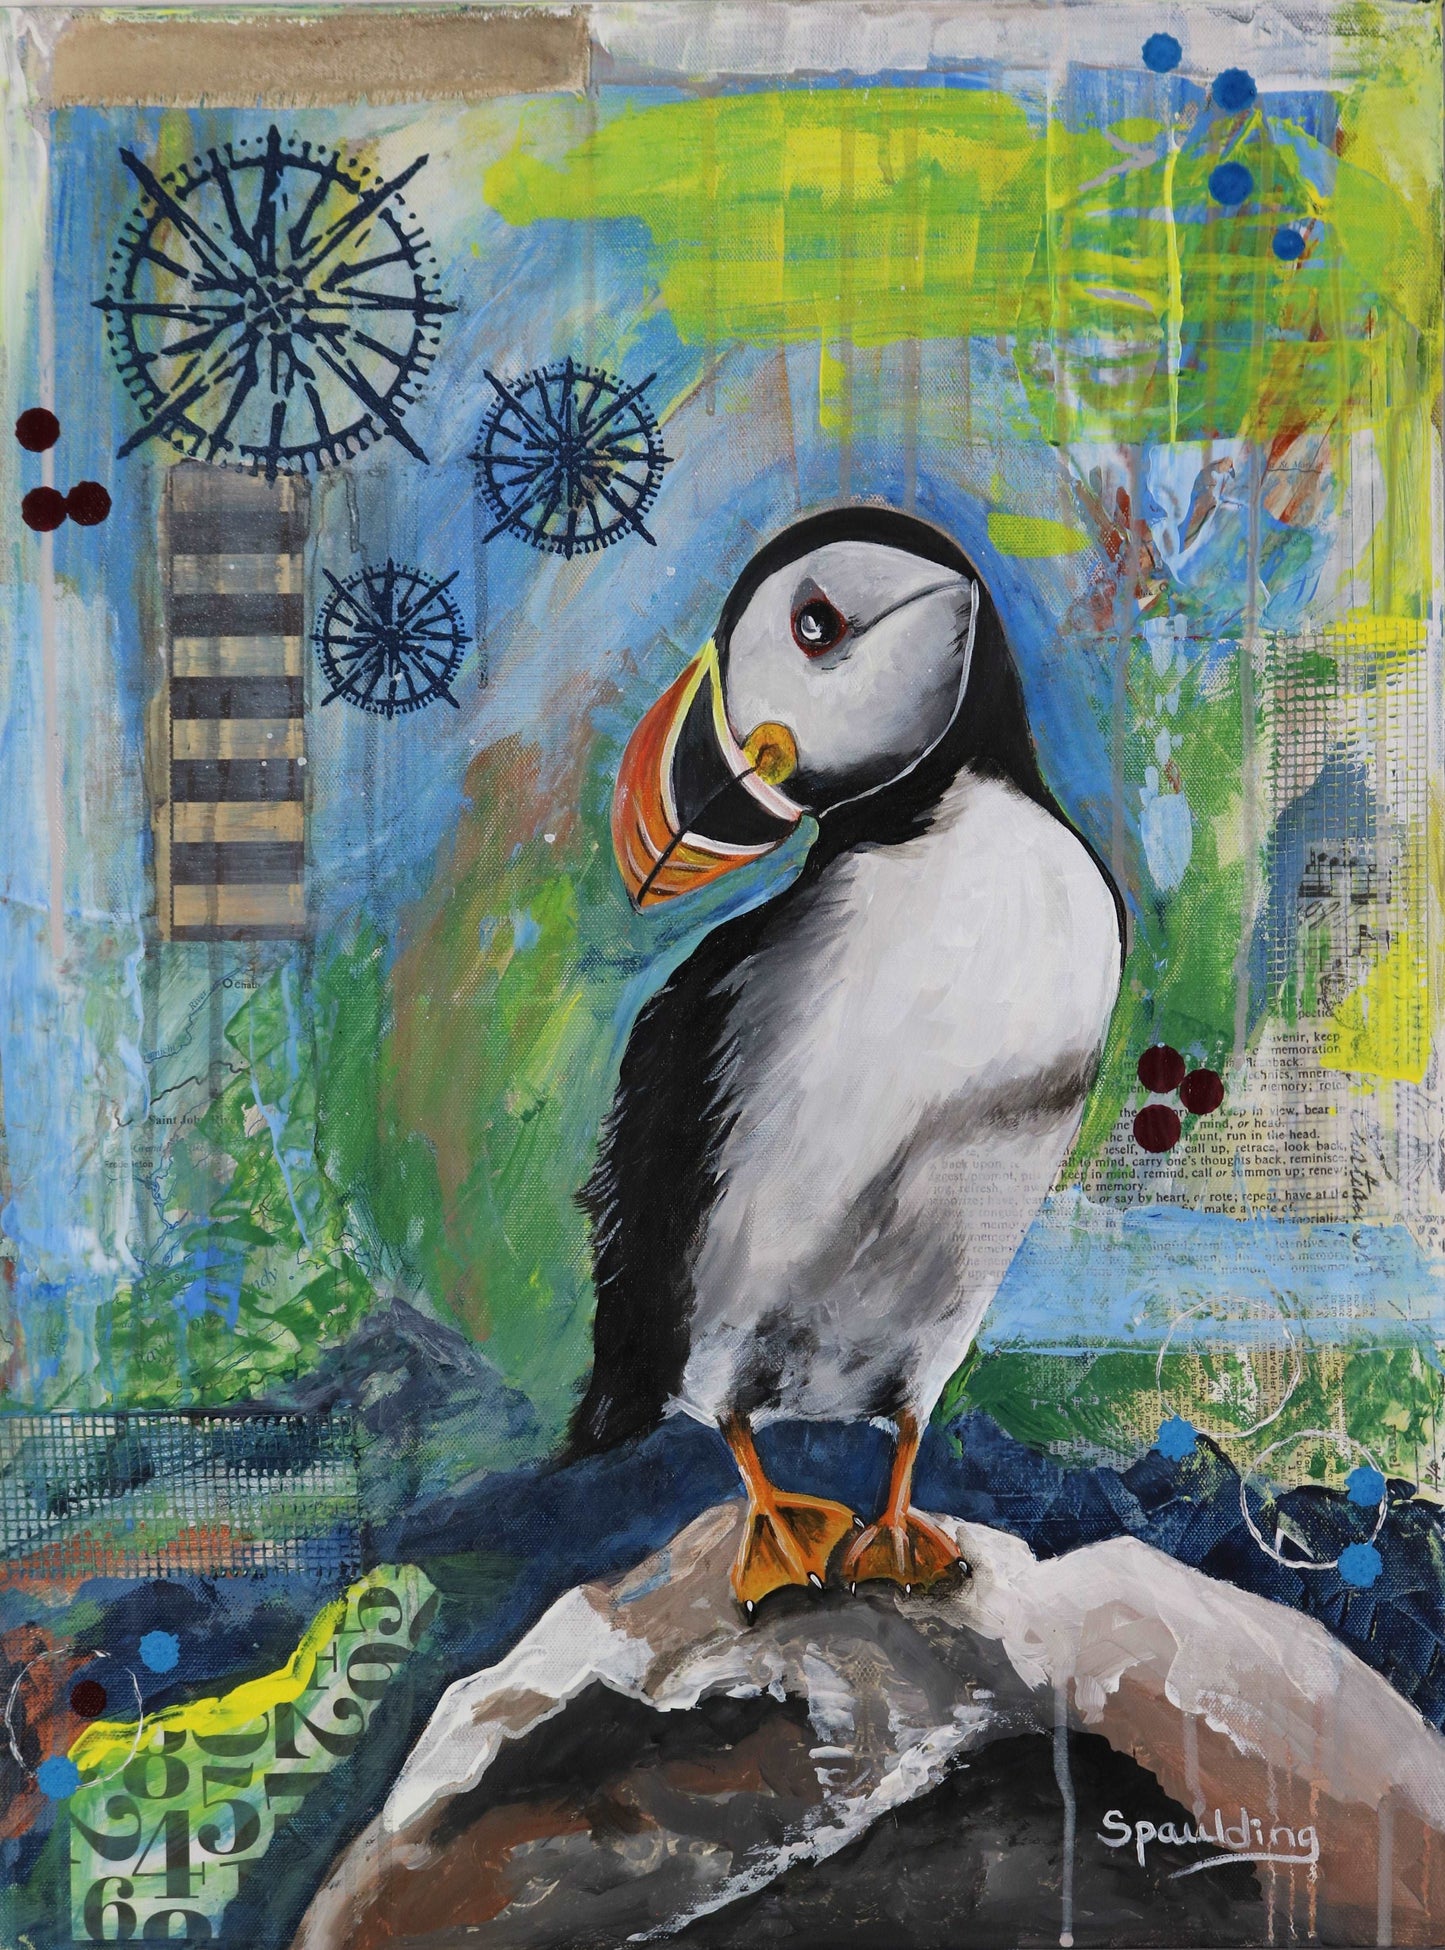 Mixed media artwork of a puffin on a rocky perch with a collage and paint background.